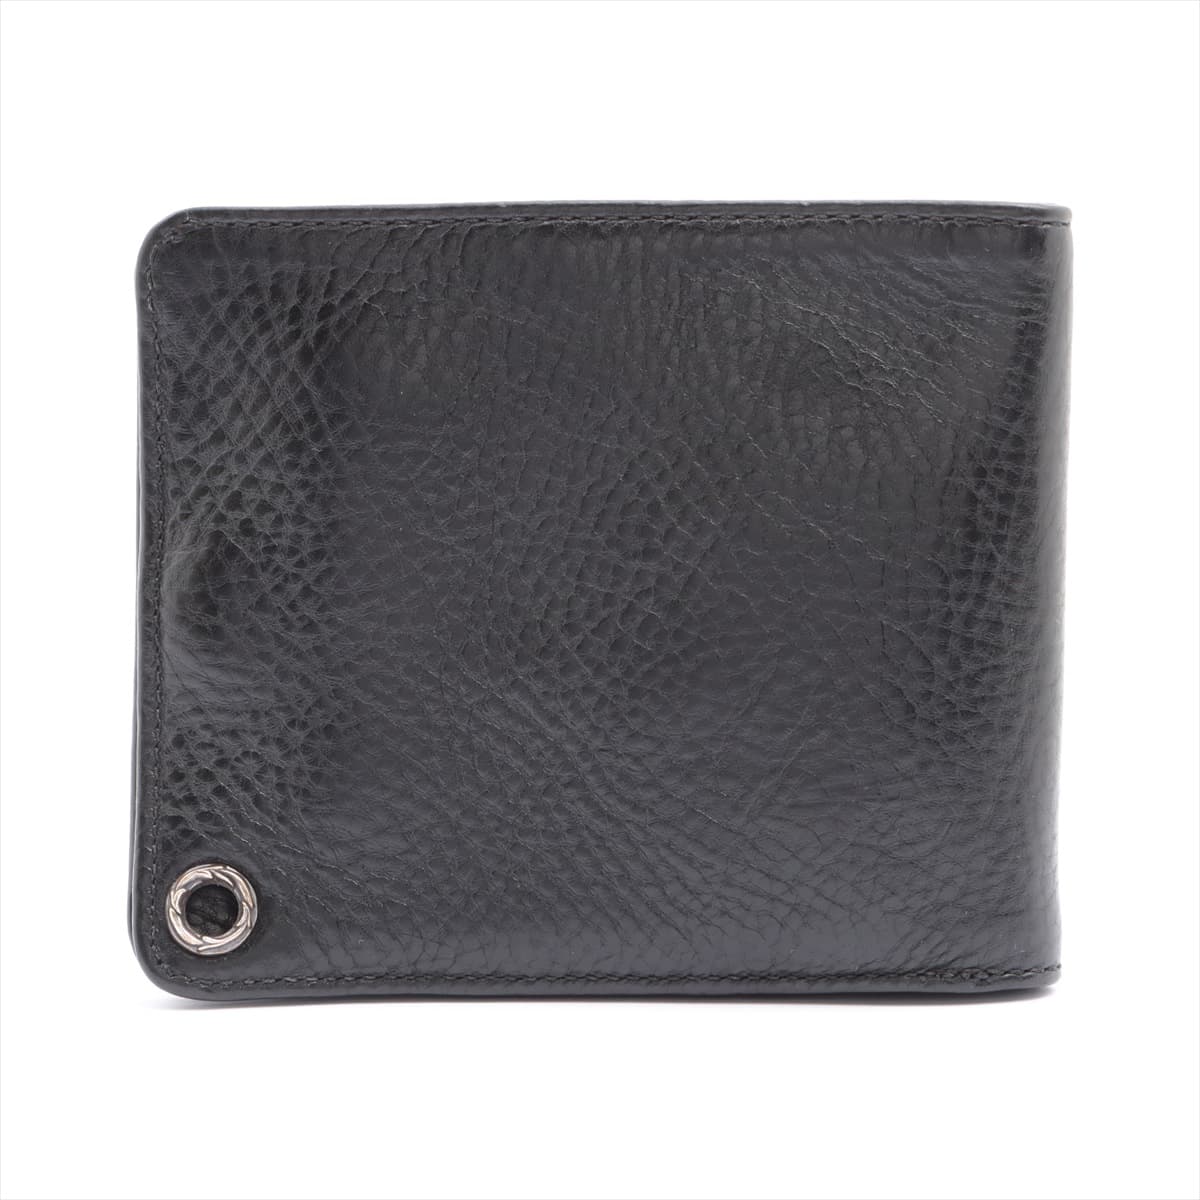 Chrome Hearts 1snap Wallet Leather With invoice Black